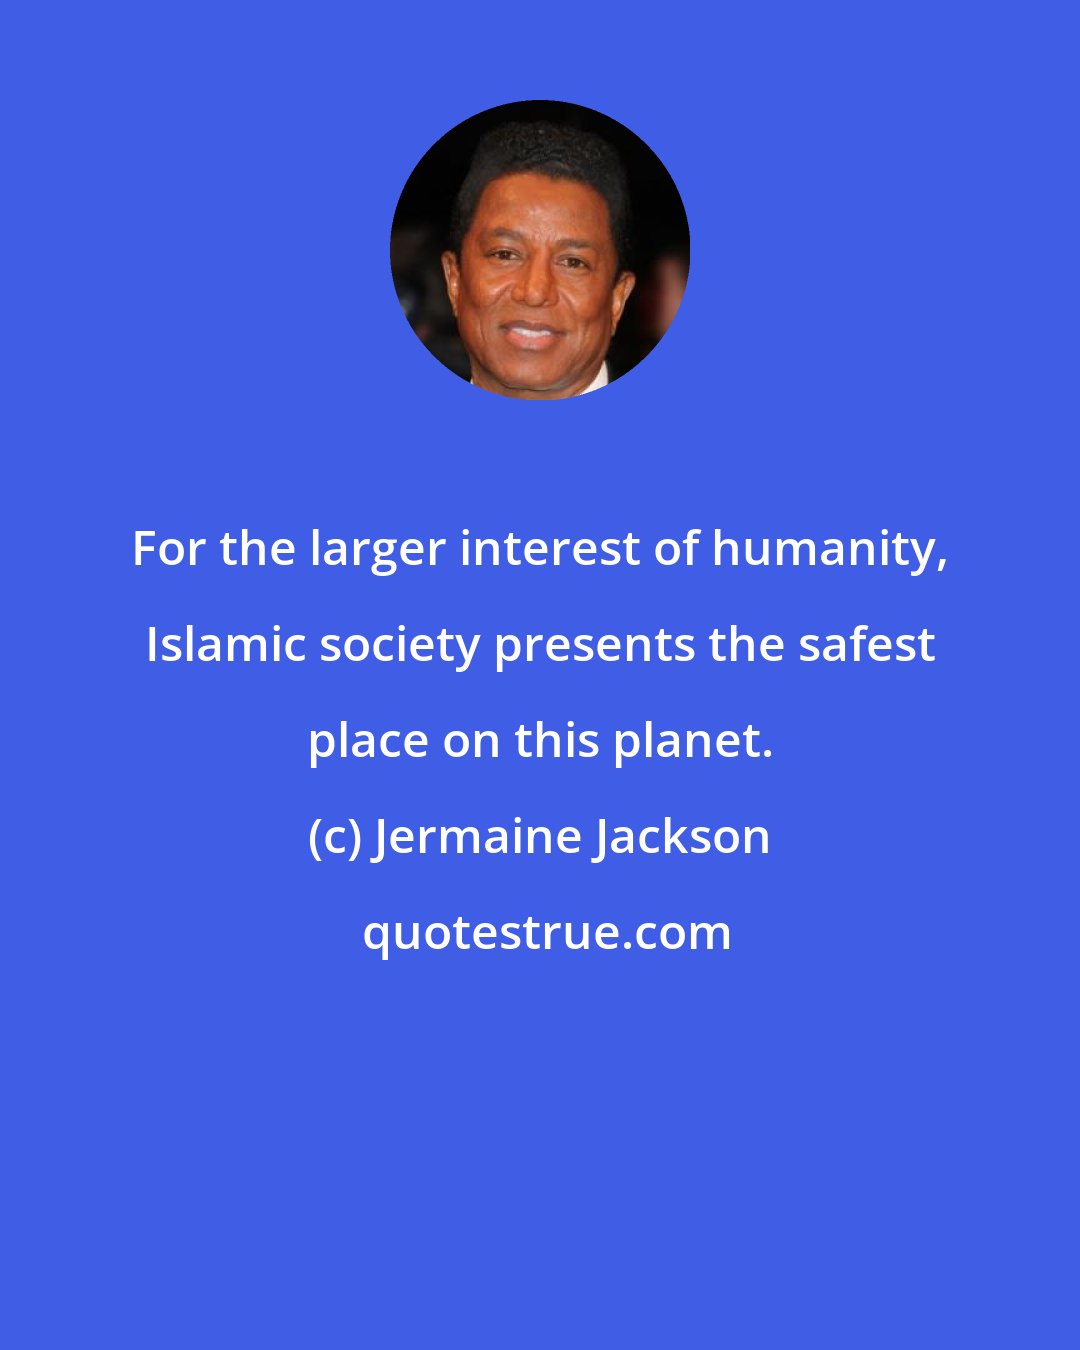 Jermaine Jackson: For the larger interest of humanity, Islamic society presents the safest place on this planet.